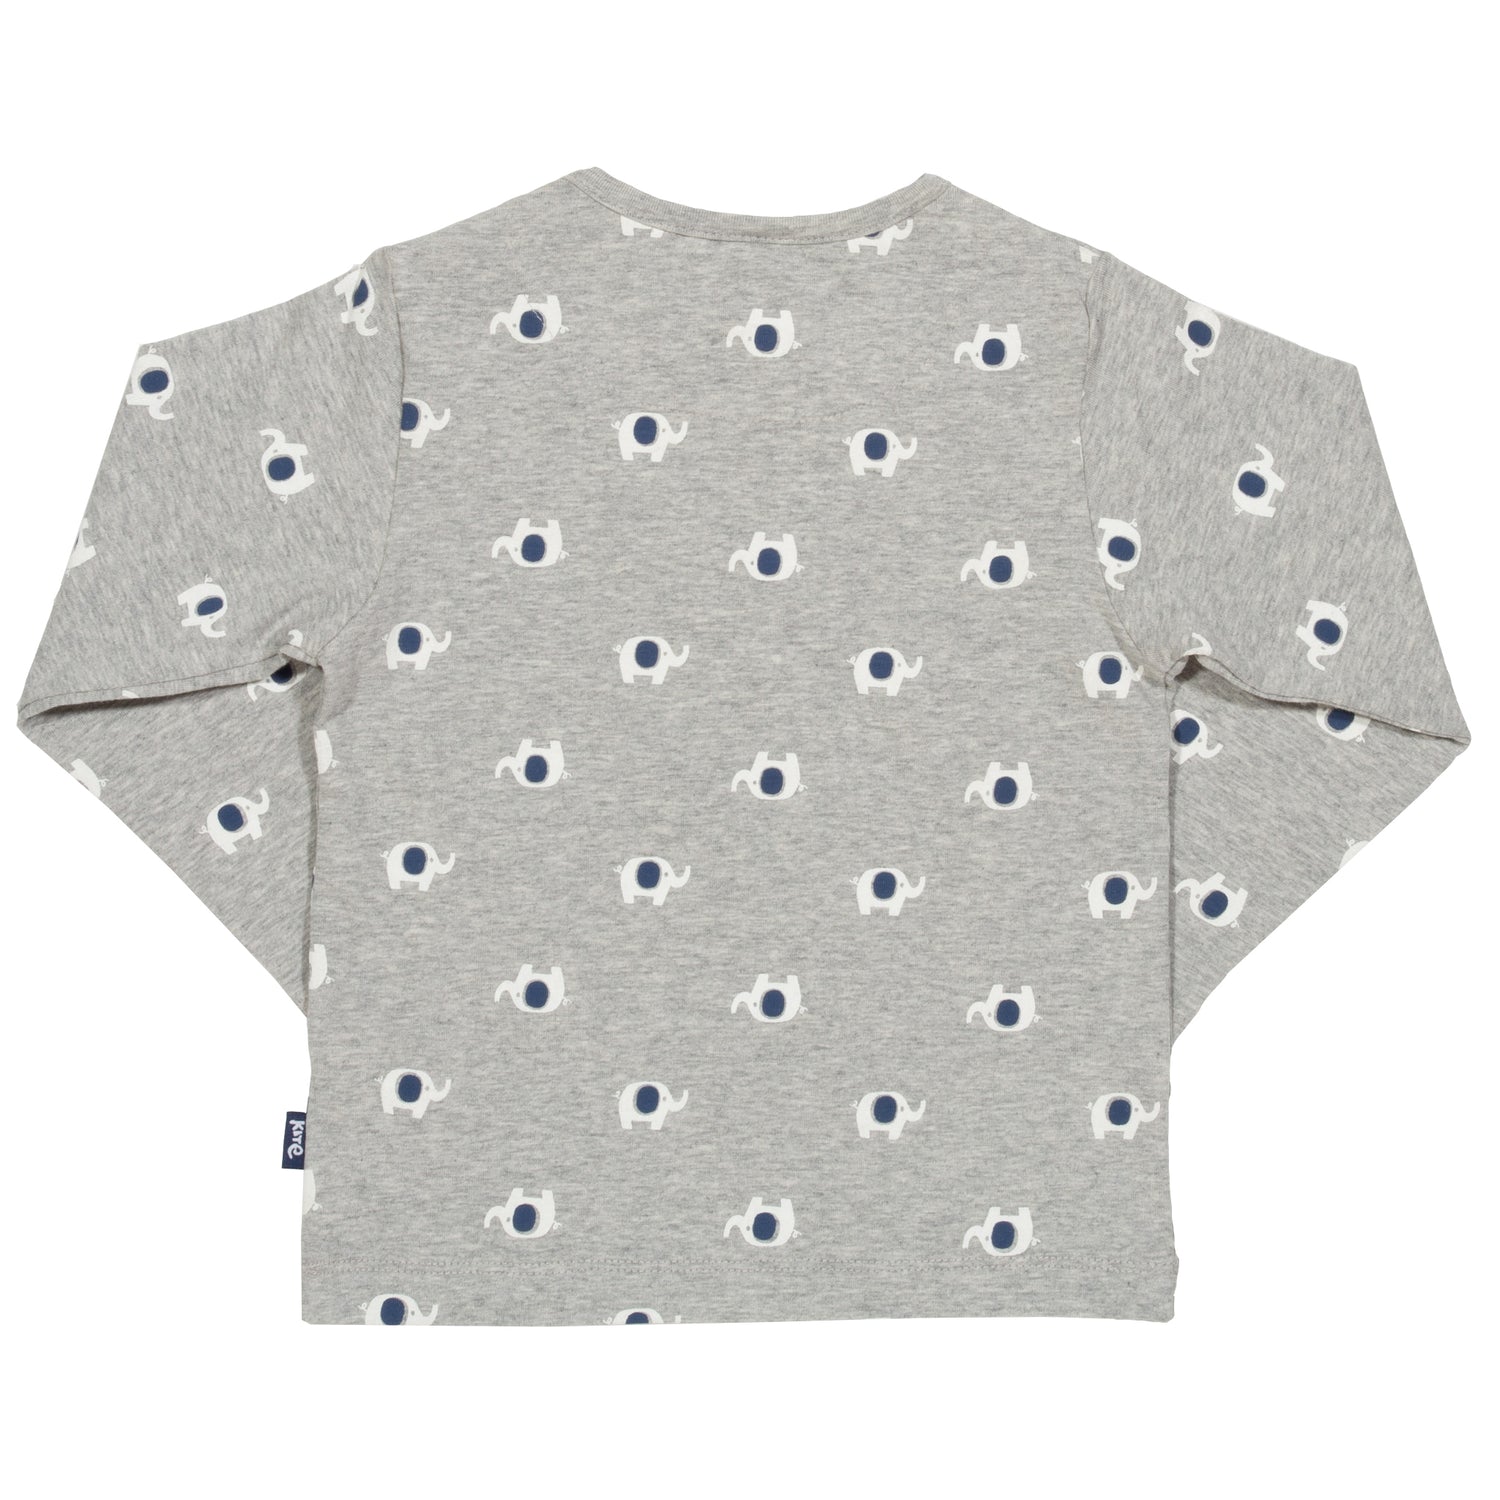 Back of grey long sleeved top with elephant print